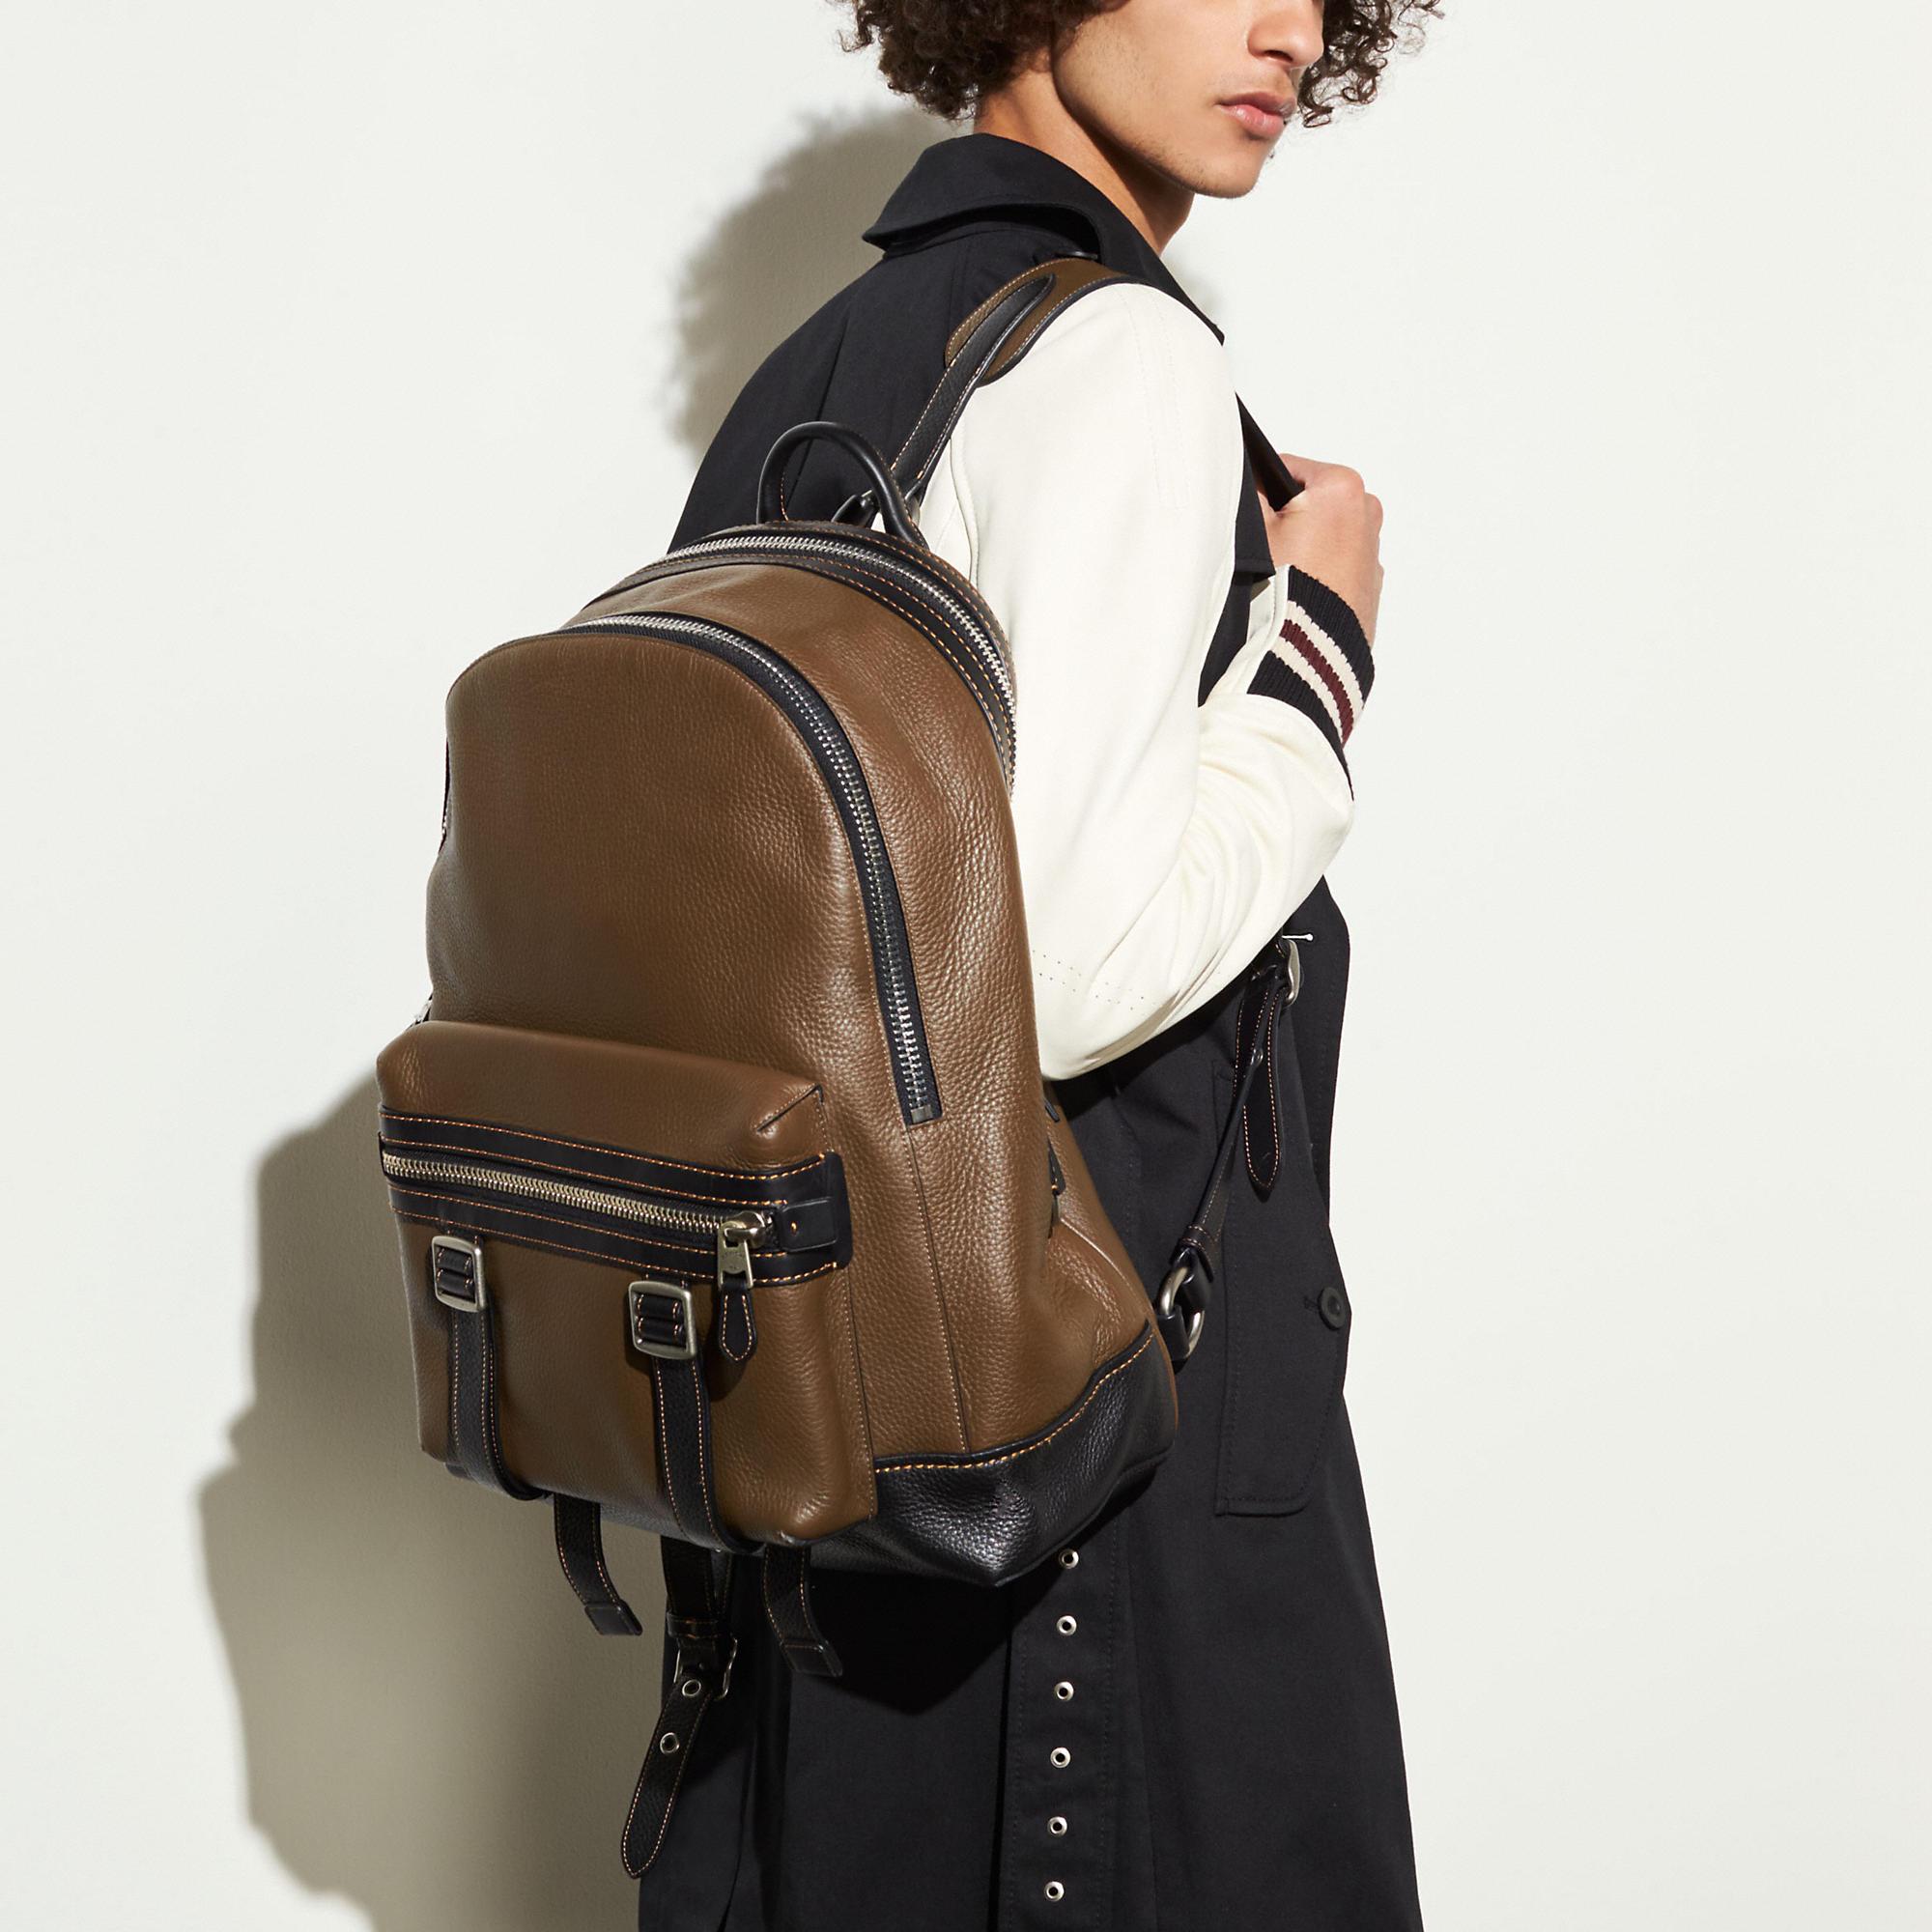 COACH Flag Backpack In Pebble Leather in Black for Men - Lyst